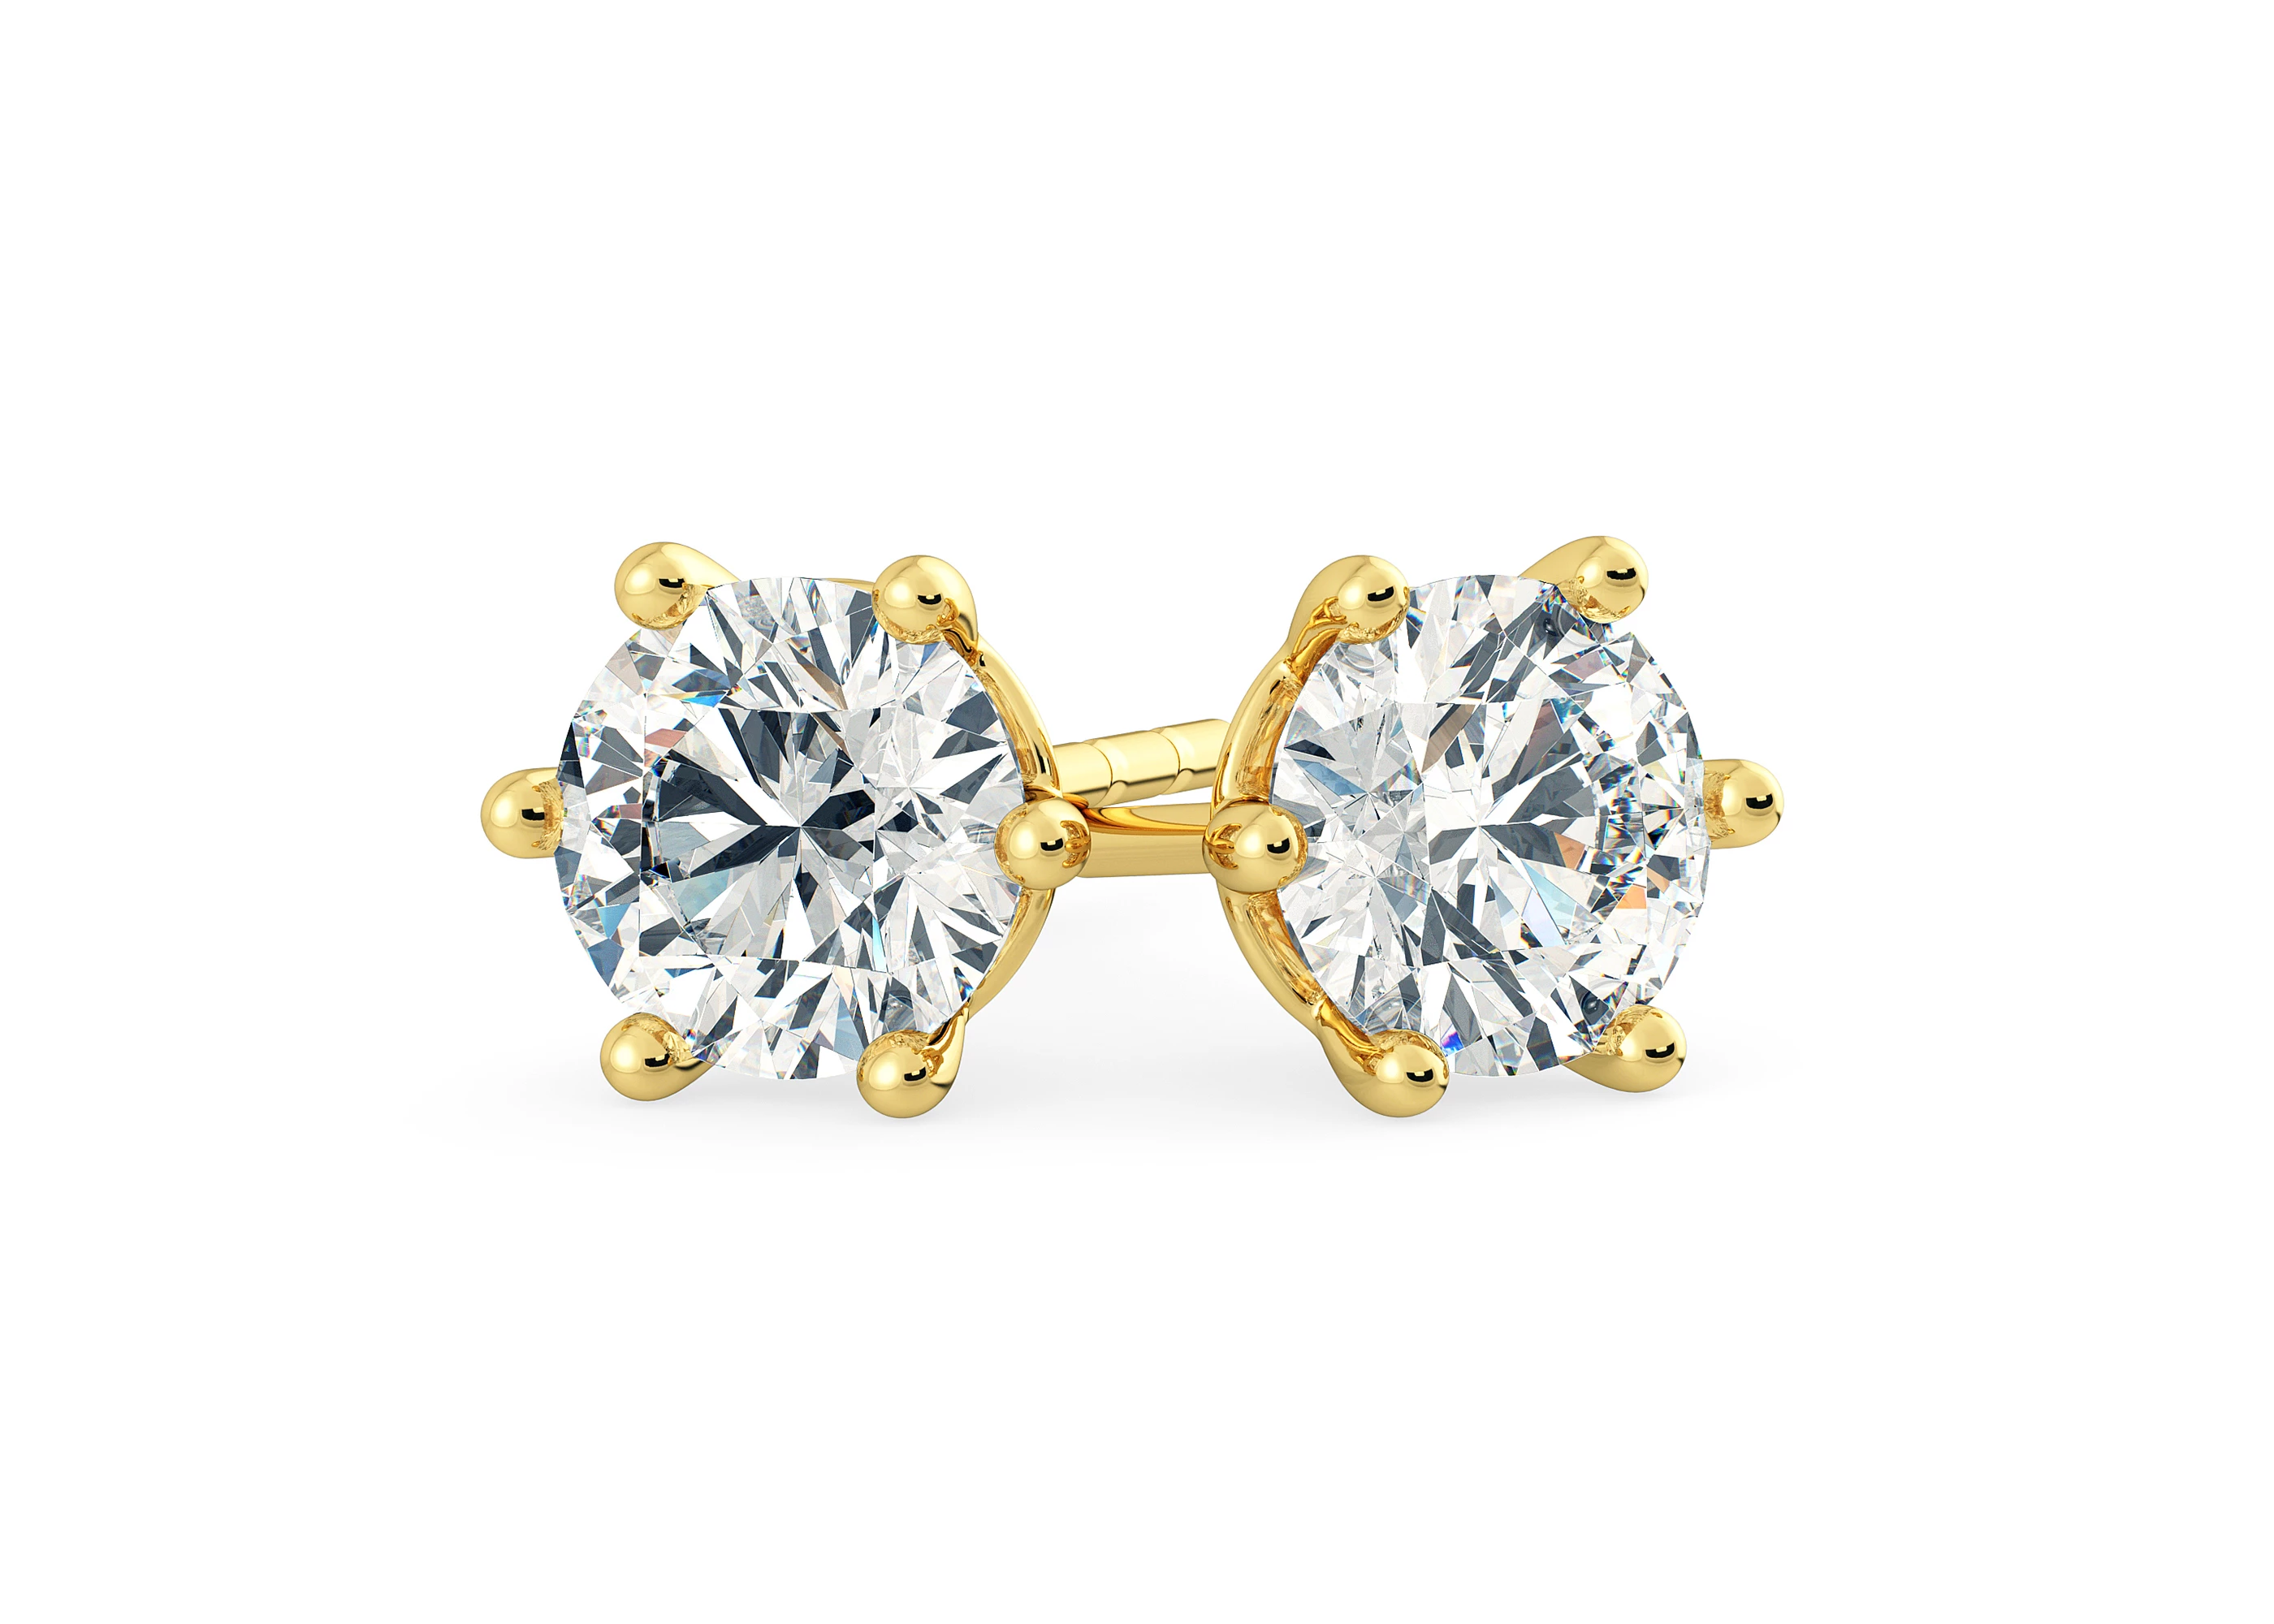 Bellezza Round Brilliant Diamond Stud Earrings in 18K Yellow Gold with Alpha Backs